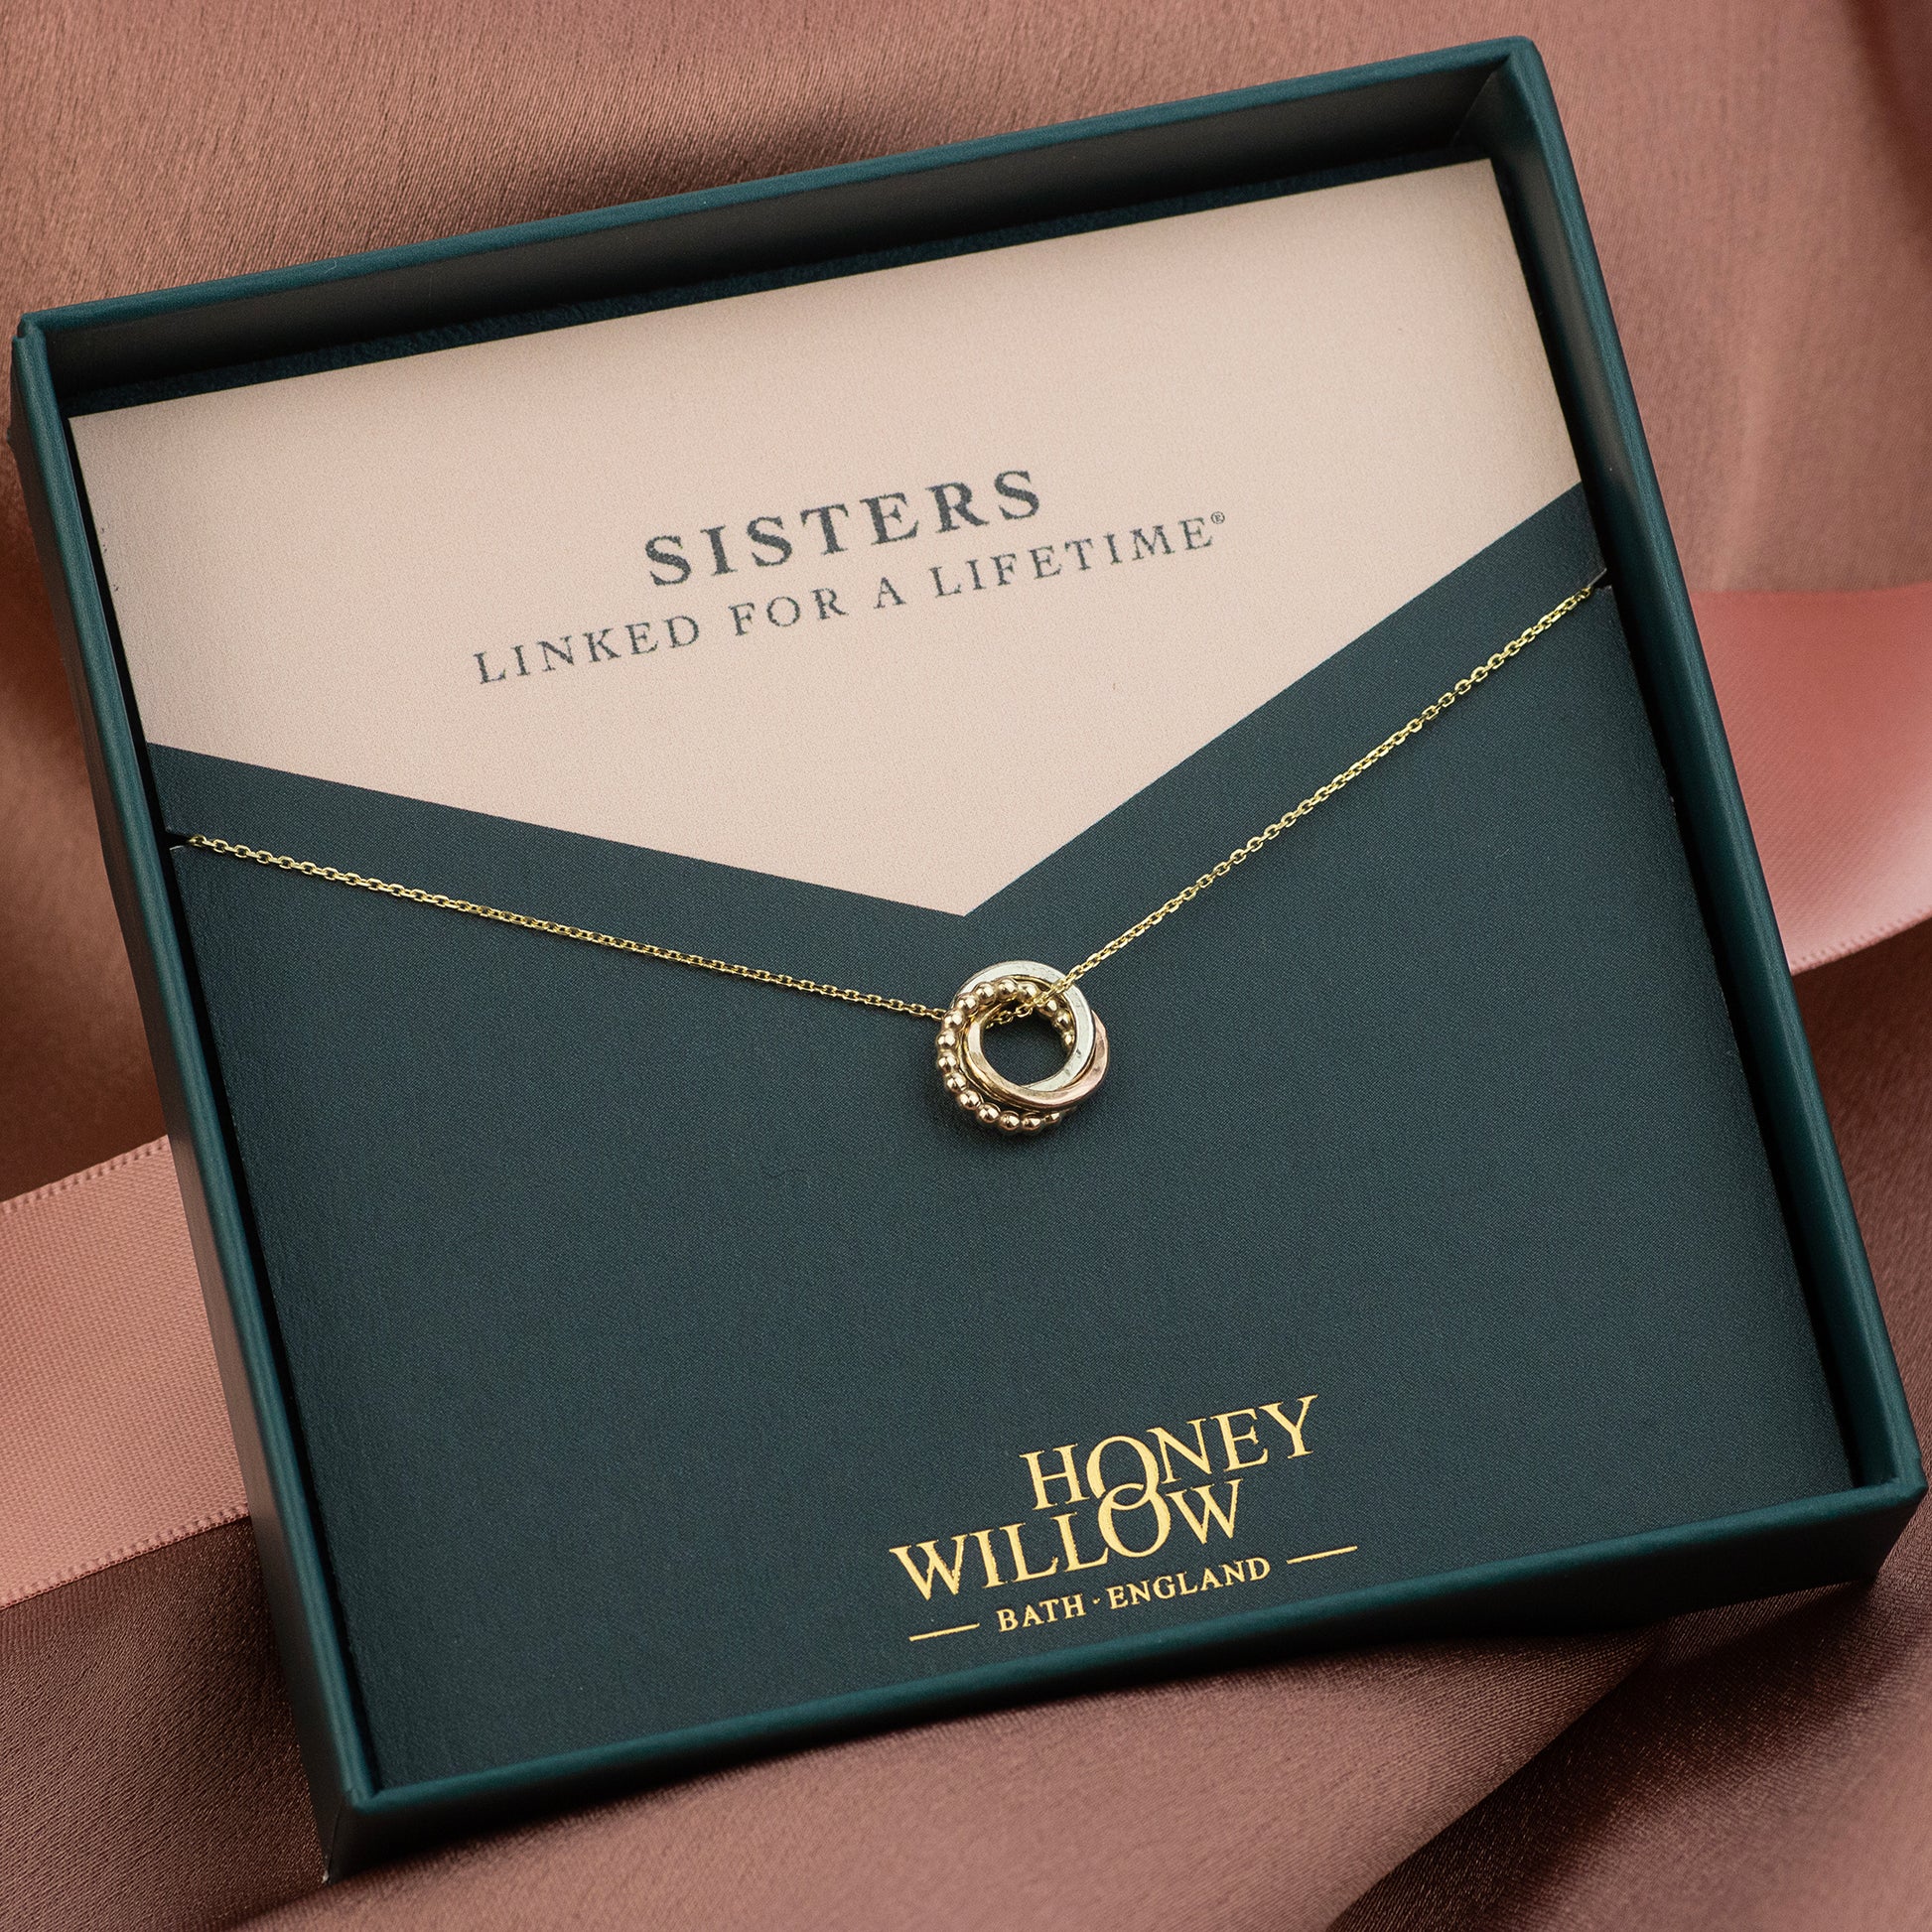 3 Sisters Necklace - 9kt Gold, Rose Gold & Silver Love Knot Necklace